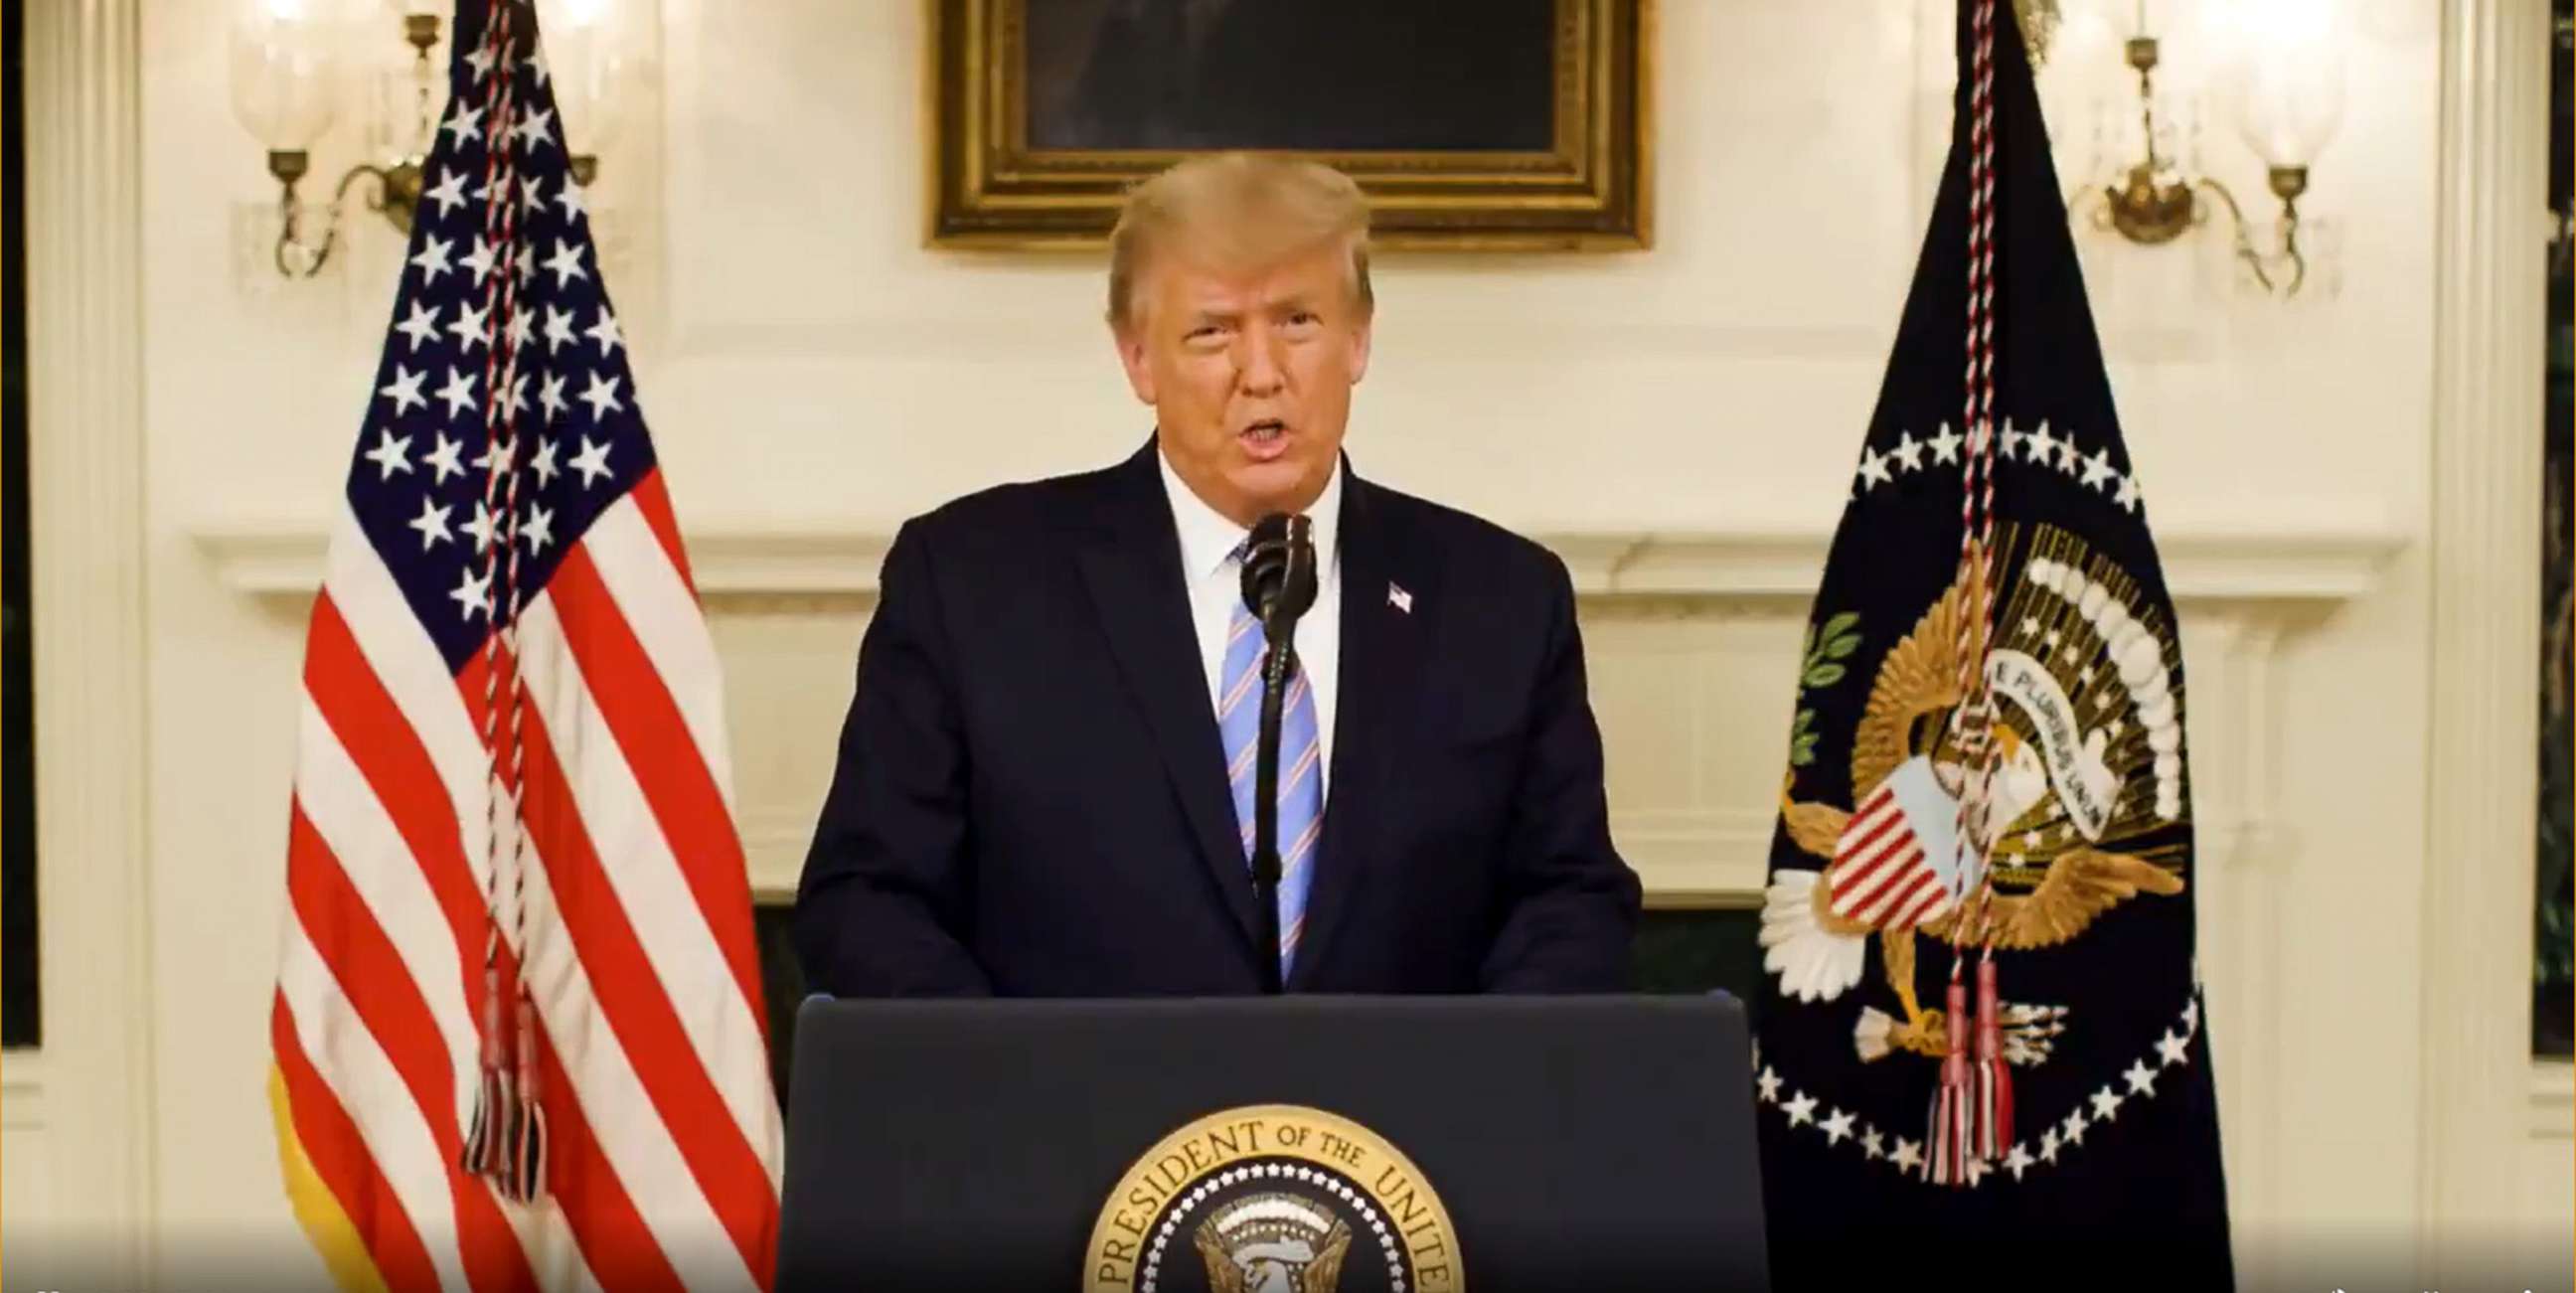 PHOTO: President Donald Trump addresses the nation via Twitter video in a post from Jan. 7, 2021.